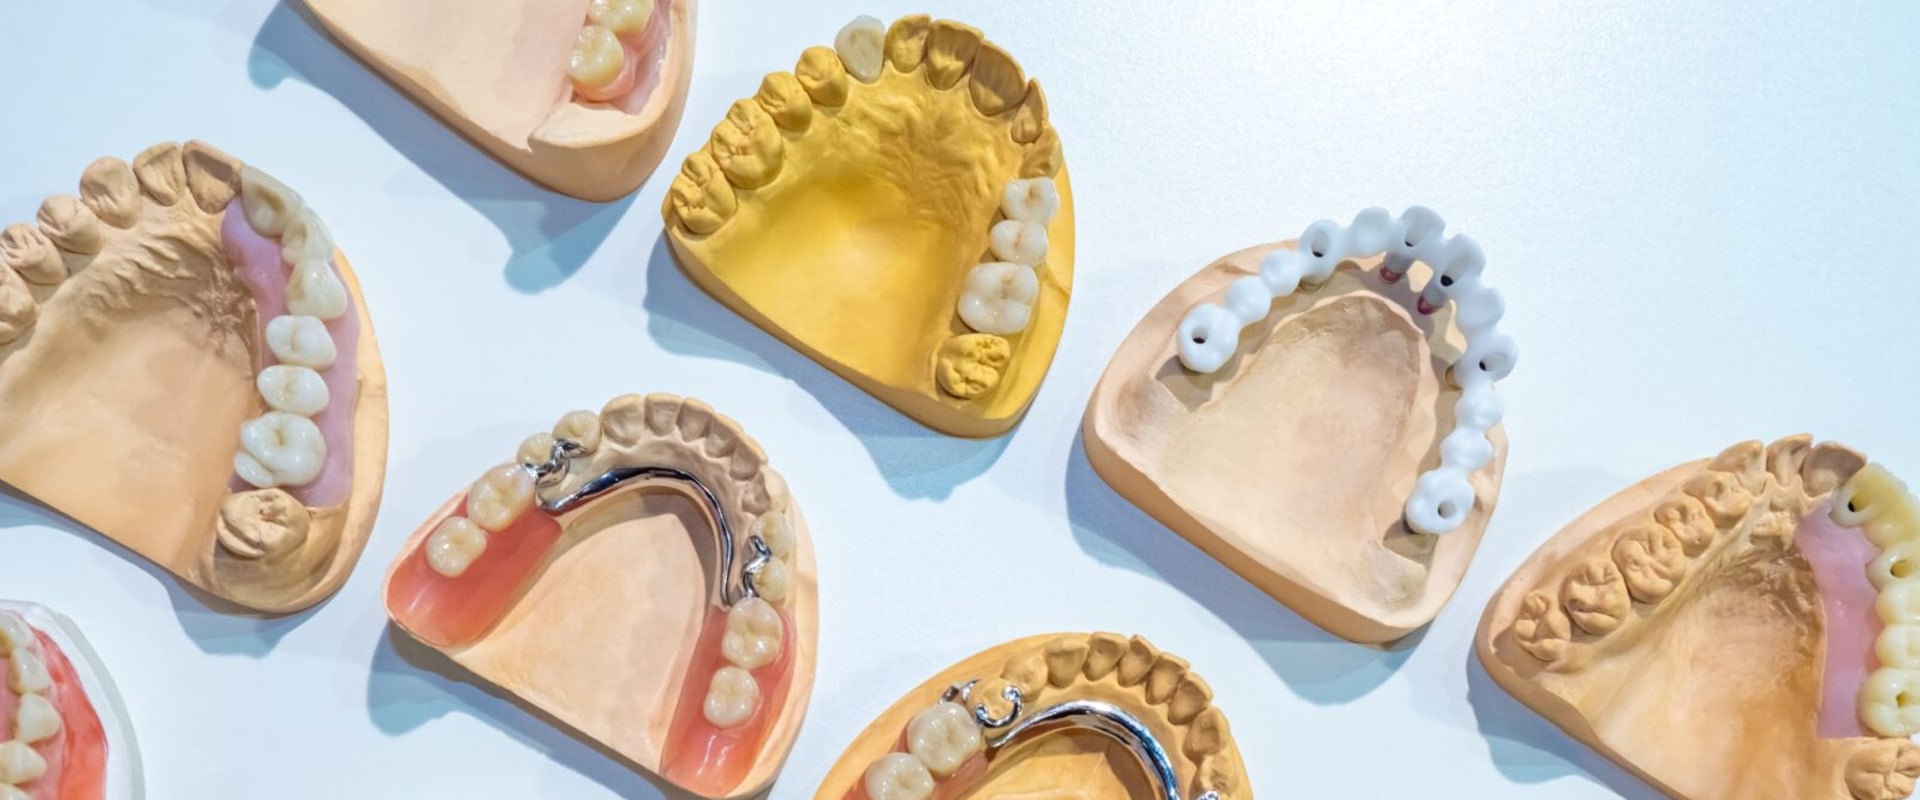 How to Properly Clean and Care for Different Types of Dentures